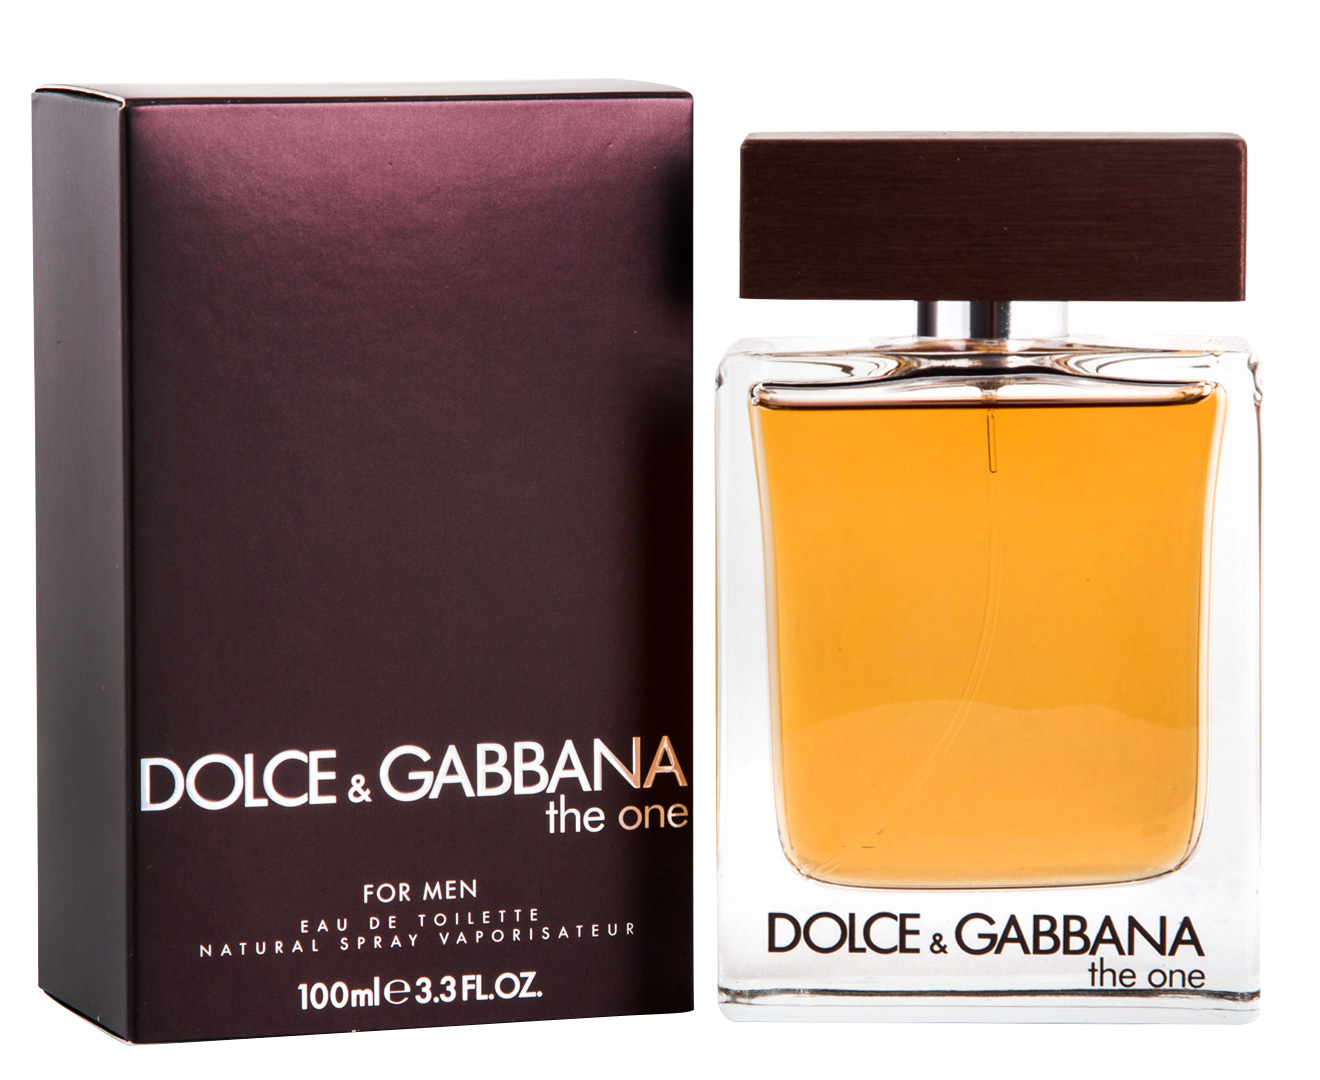 dolce&gabbana the one for men